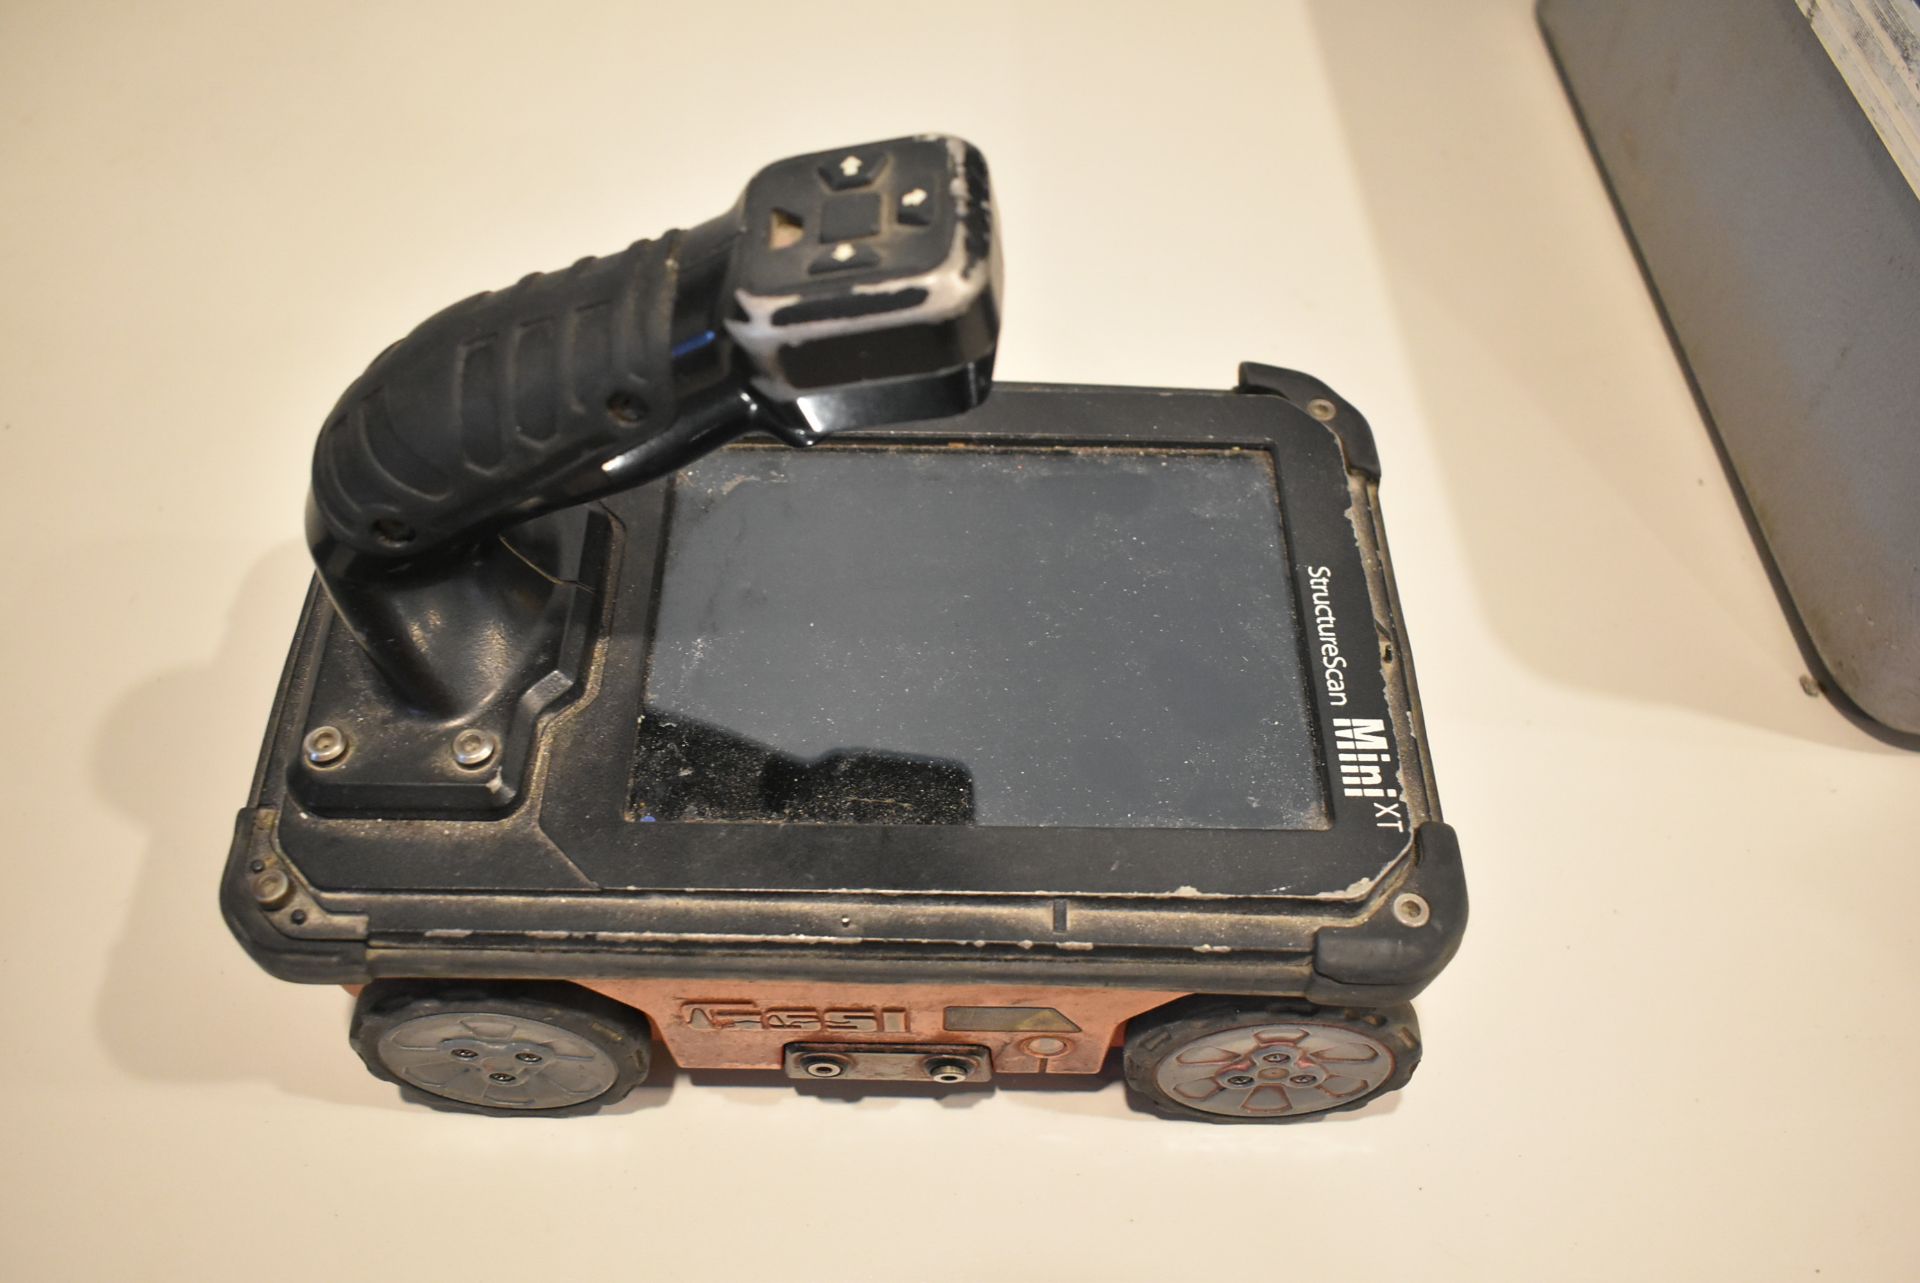 GSSI MINIXT HANDHELD GPR CONCRETE INSPECTION SYSTEM, S/N: N/A - Image 2 of 4